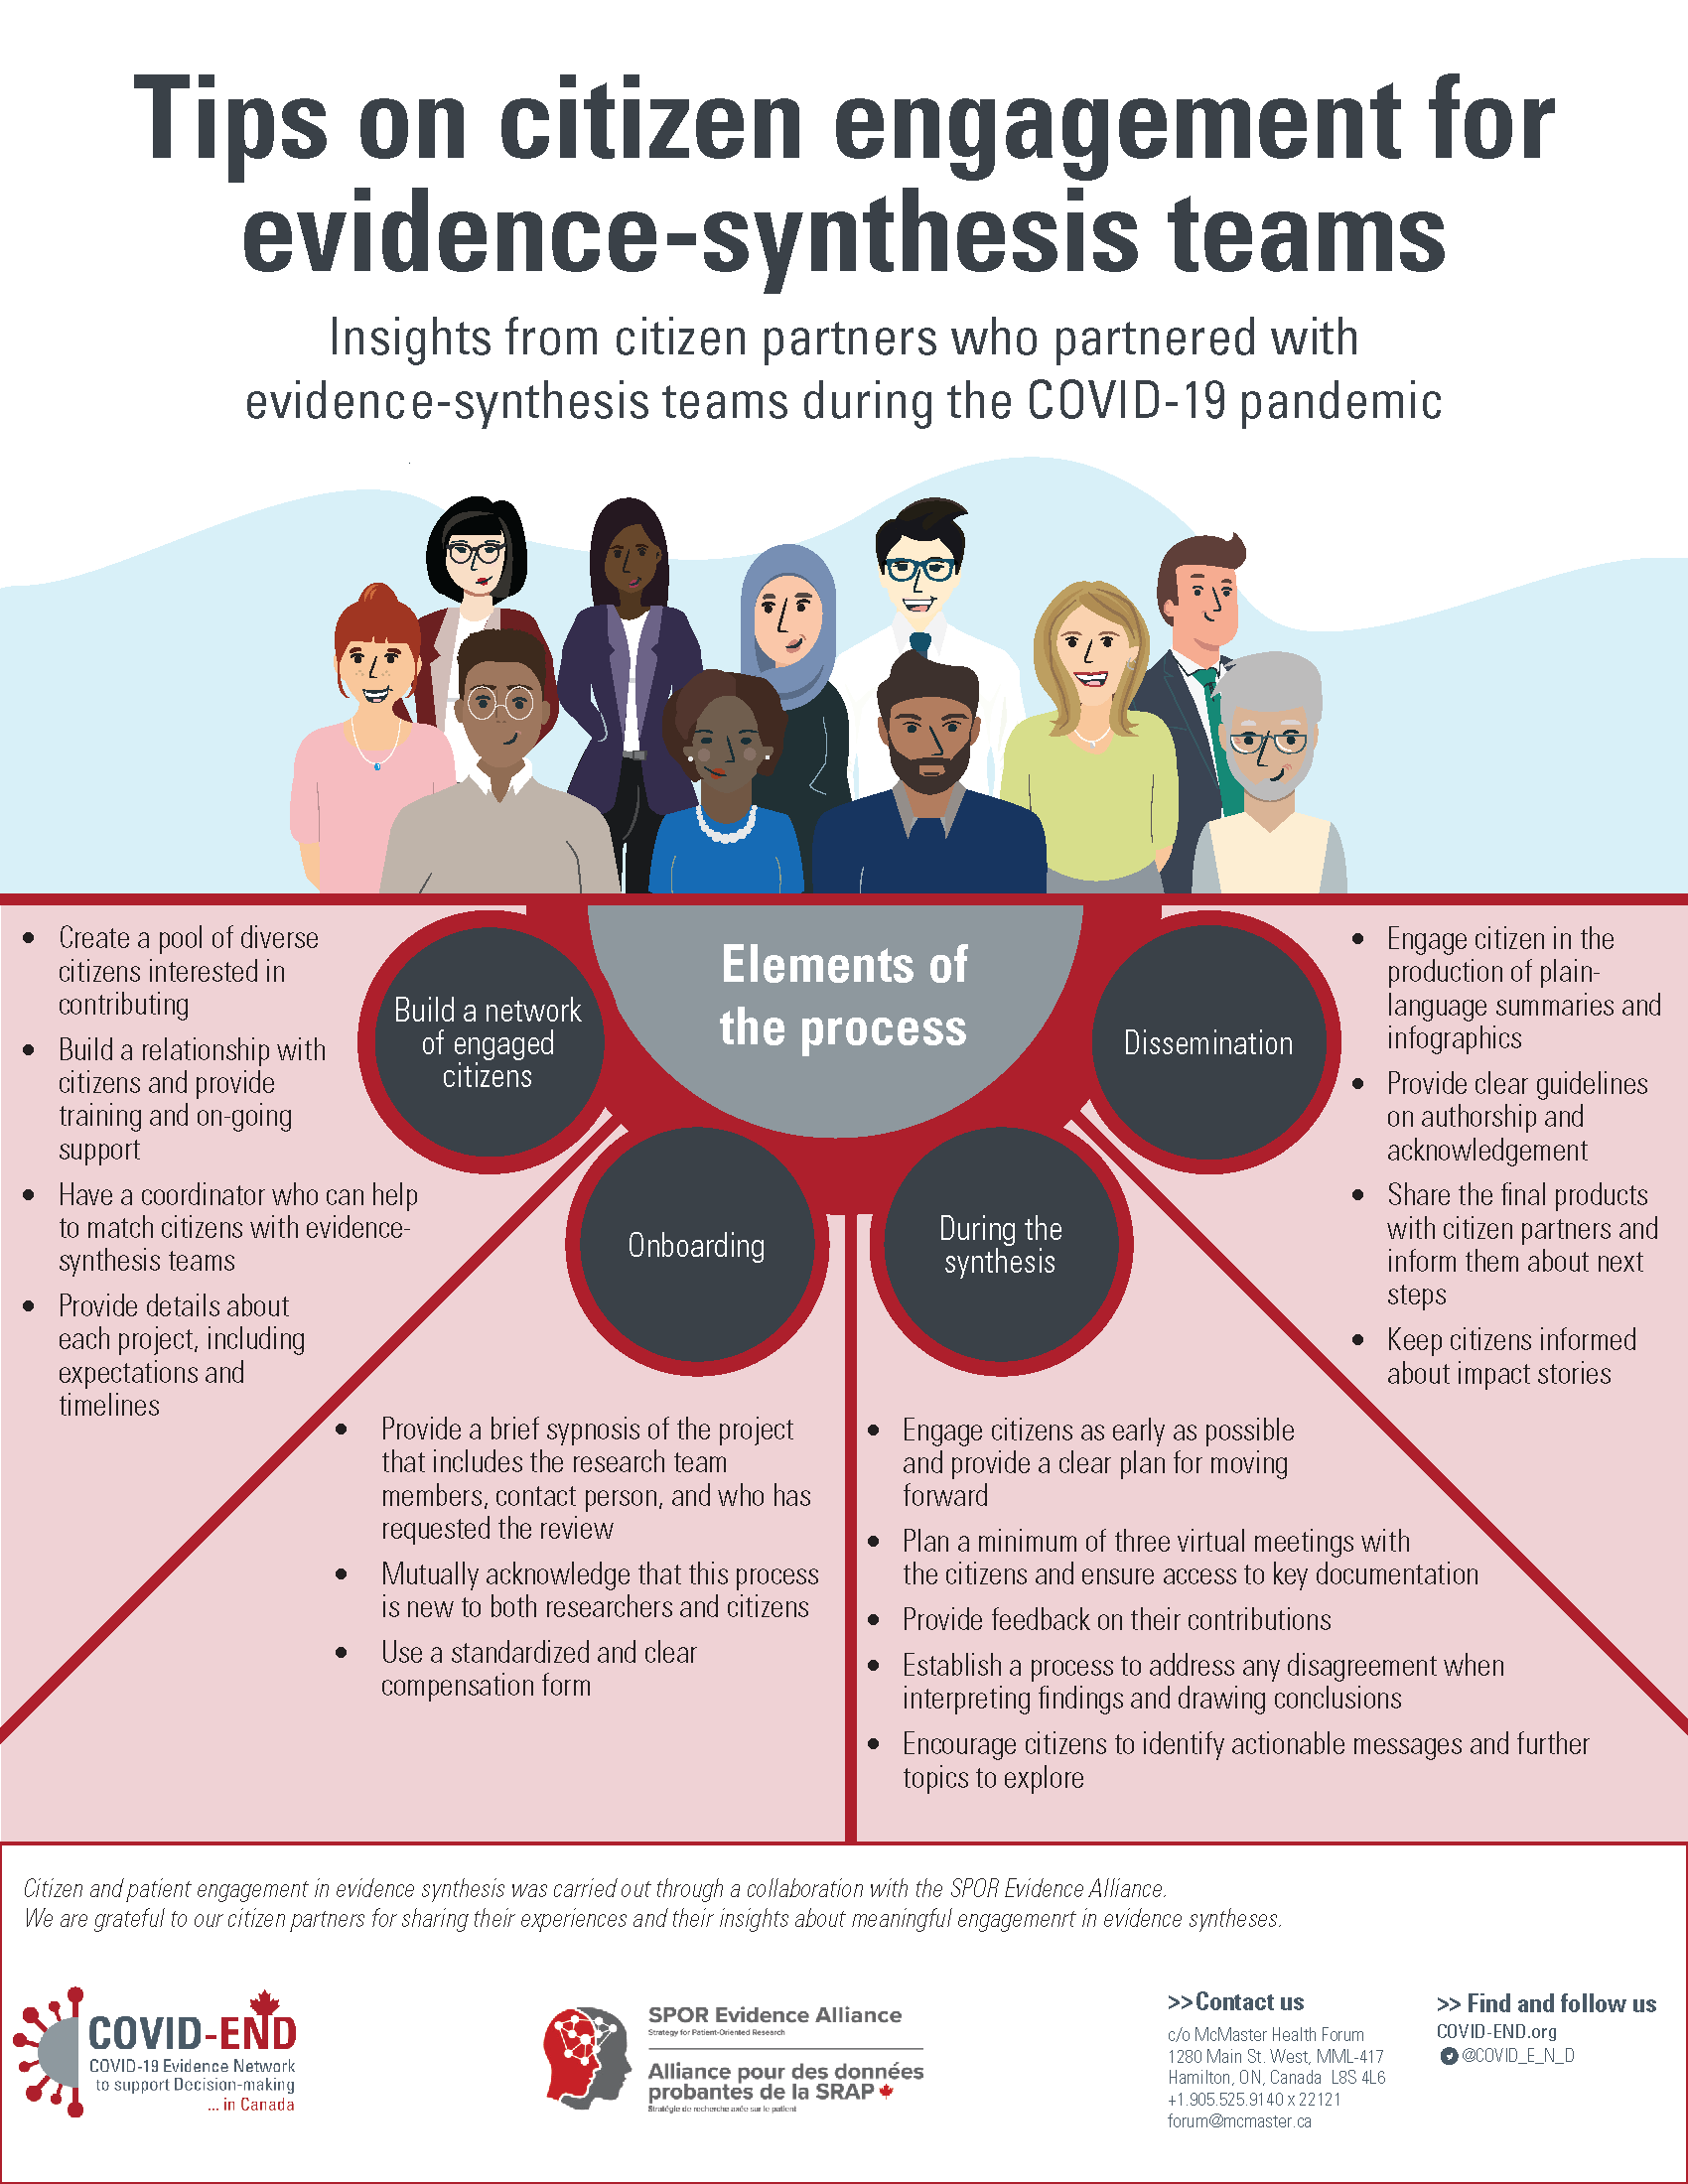 Tips on citizen engagement for evidence-synthesis teams: Insights from citizen partners who partnered with evidence-synthesis teams during the COVID-19 pandemic